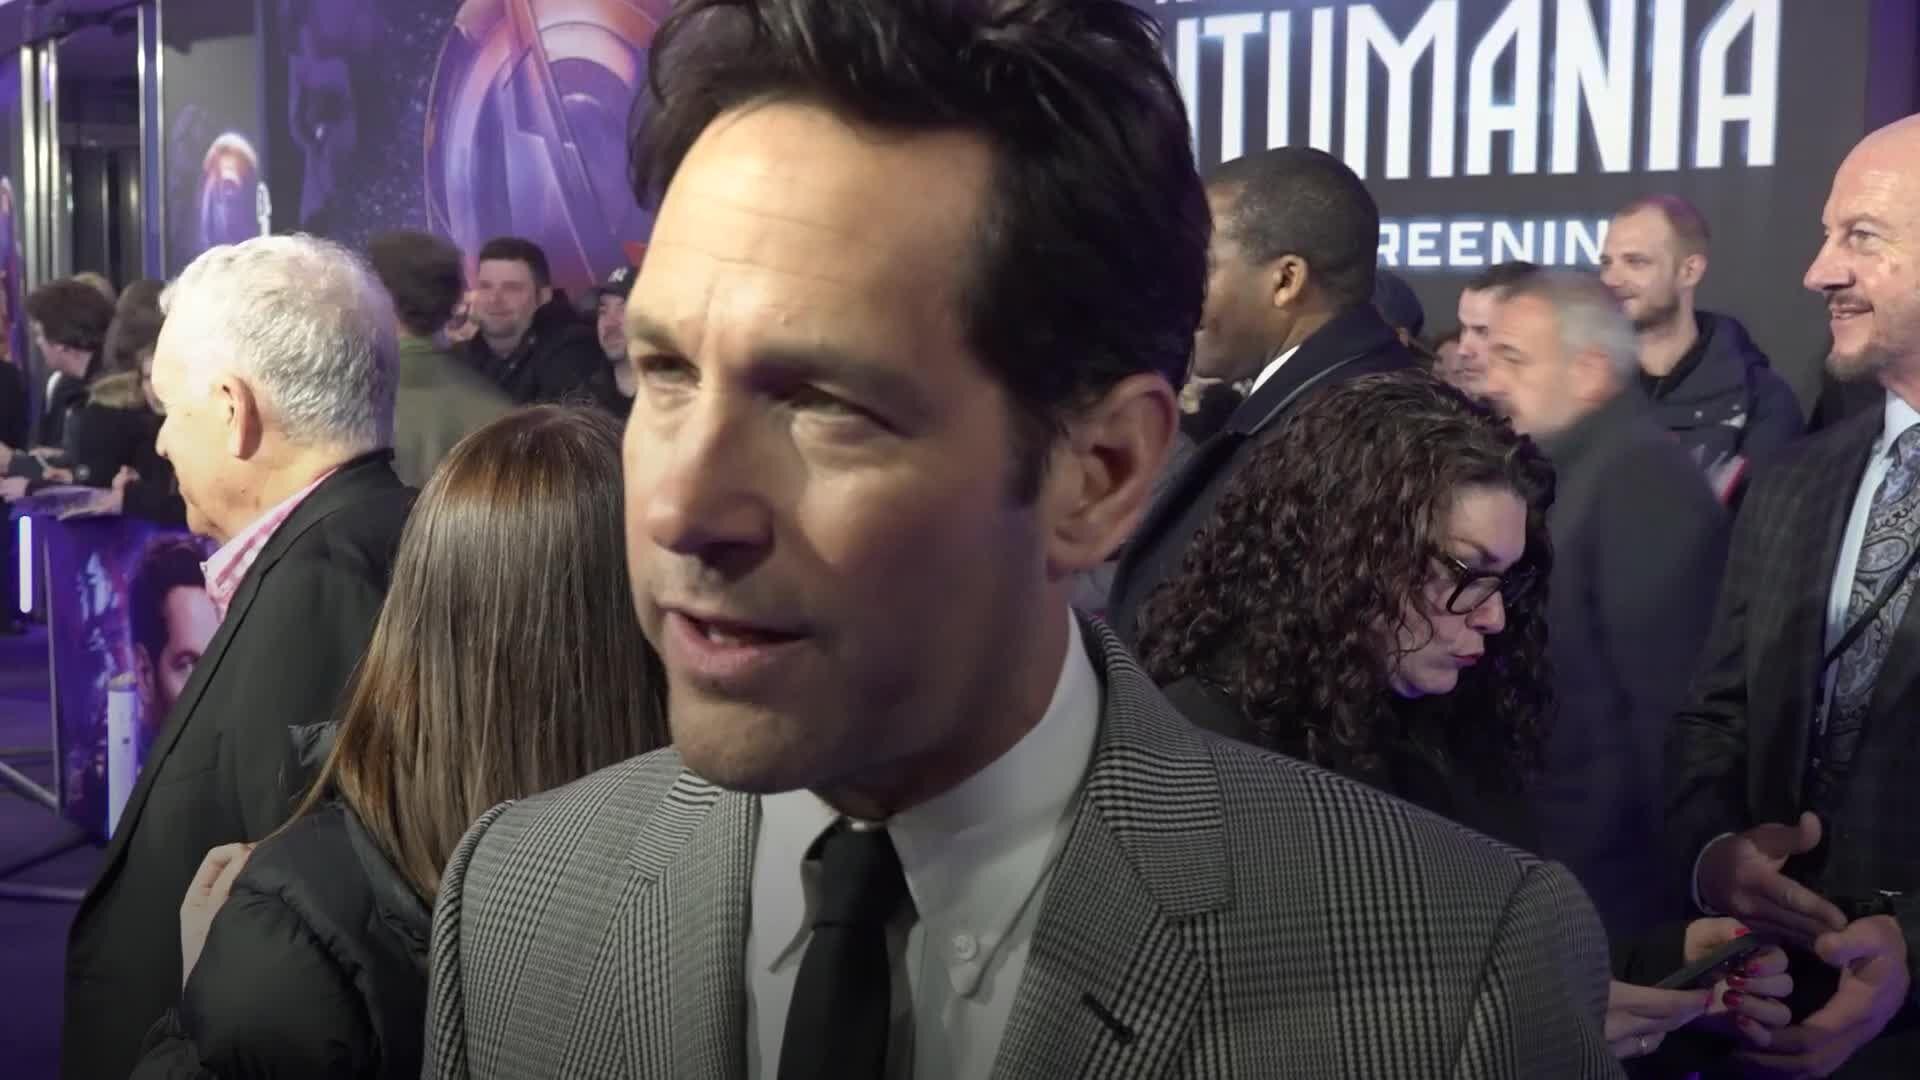 Ant-Man opens big at box office with $104M for 'Quantumania' 